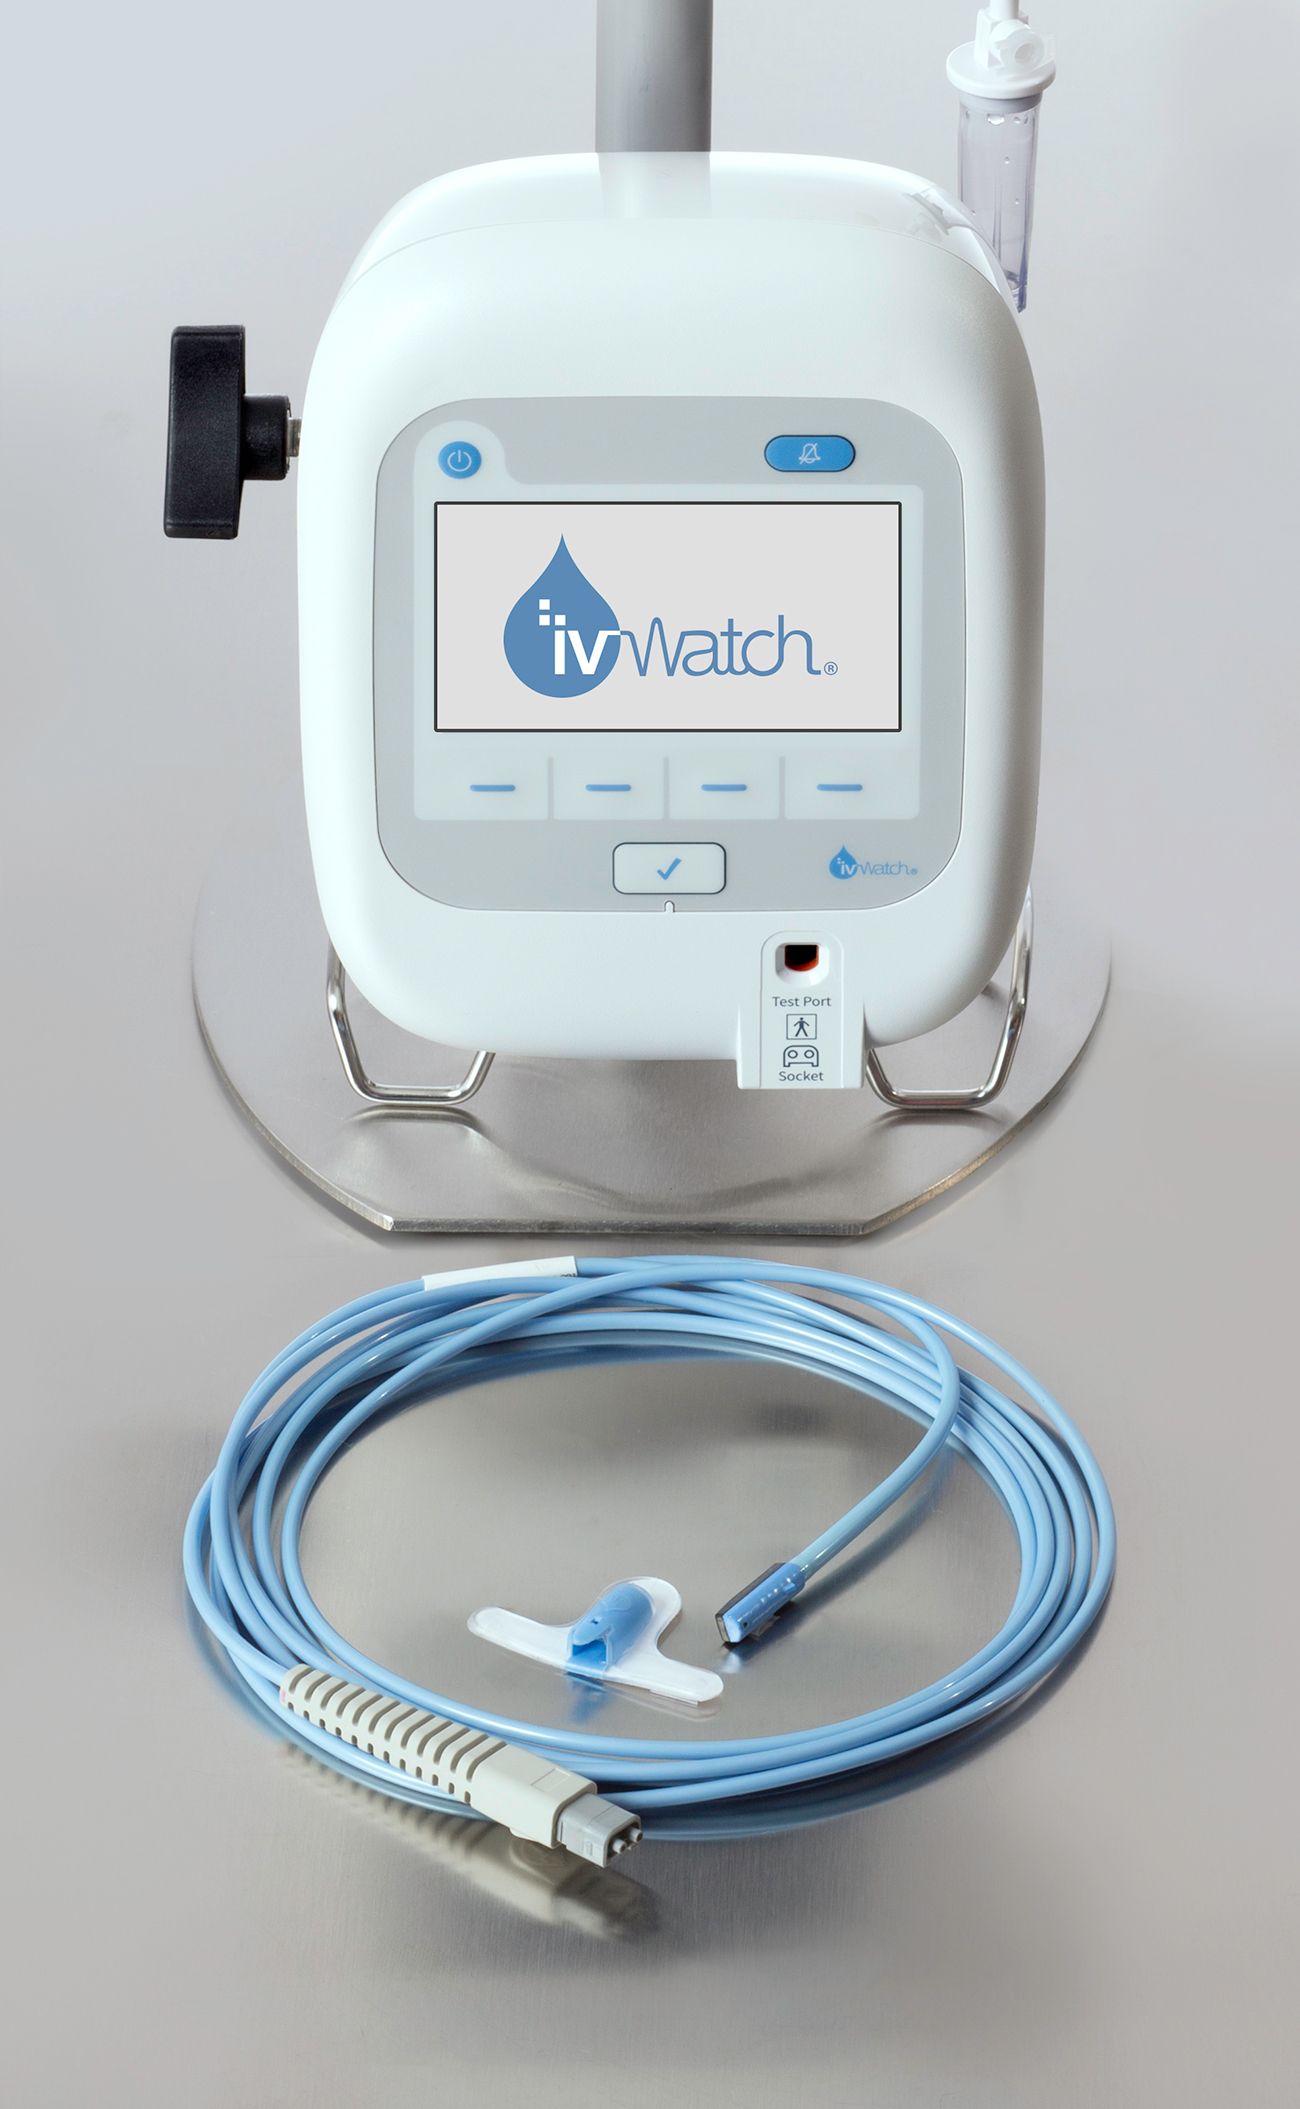 Image: The ivWatch 400 continuous IV monitoring device (Photo courtesy of ivWatch).